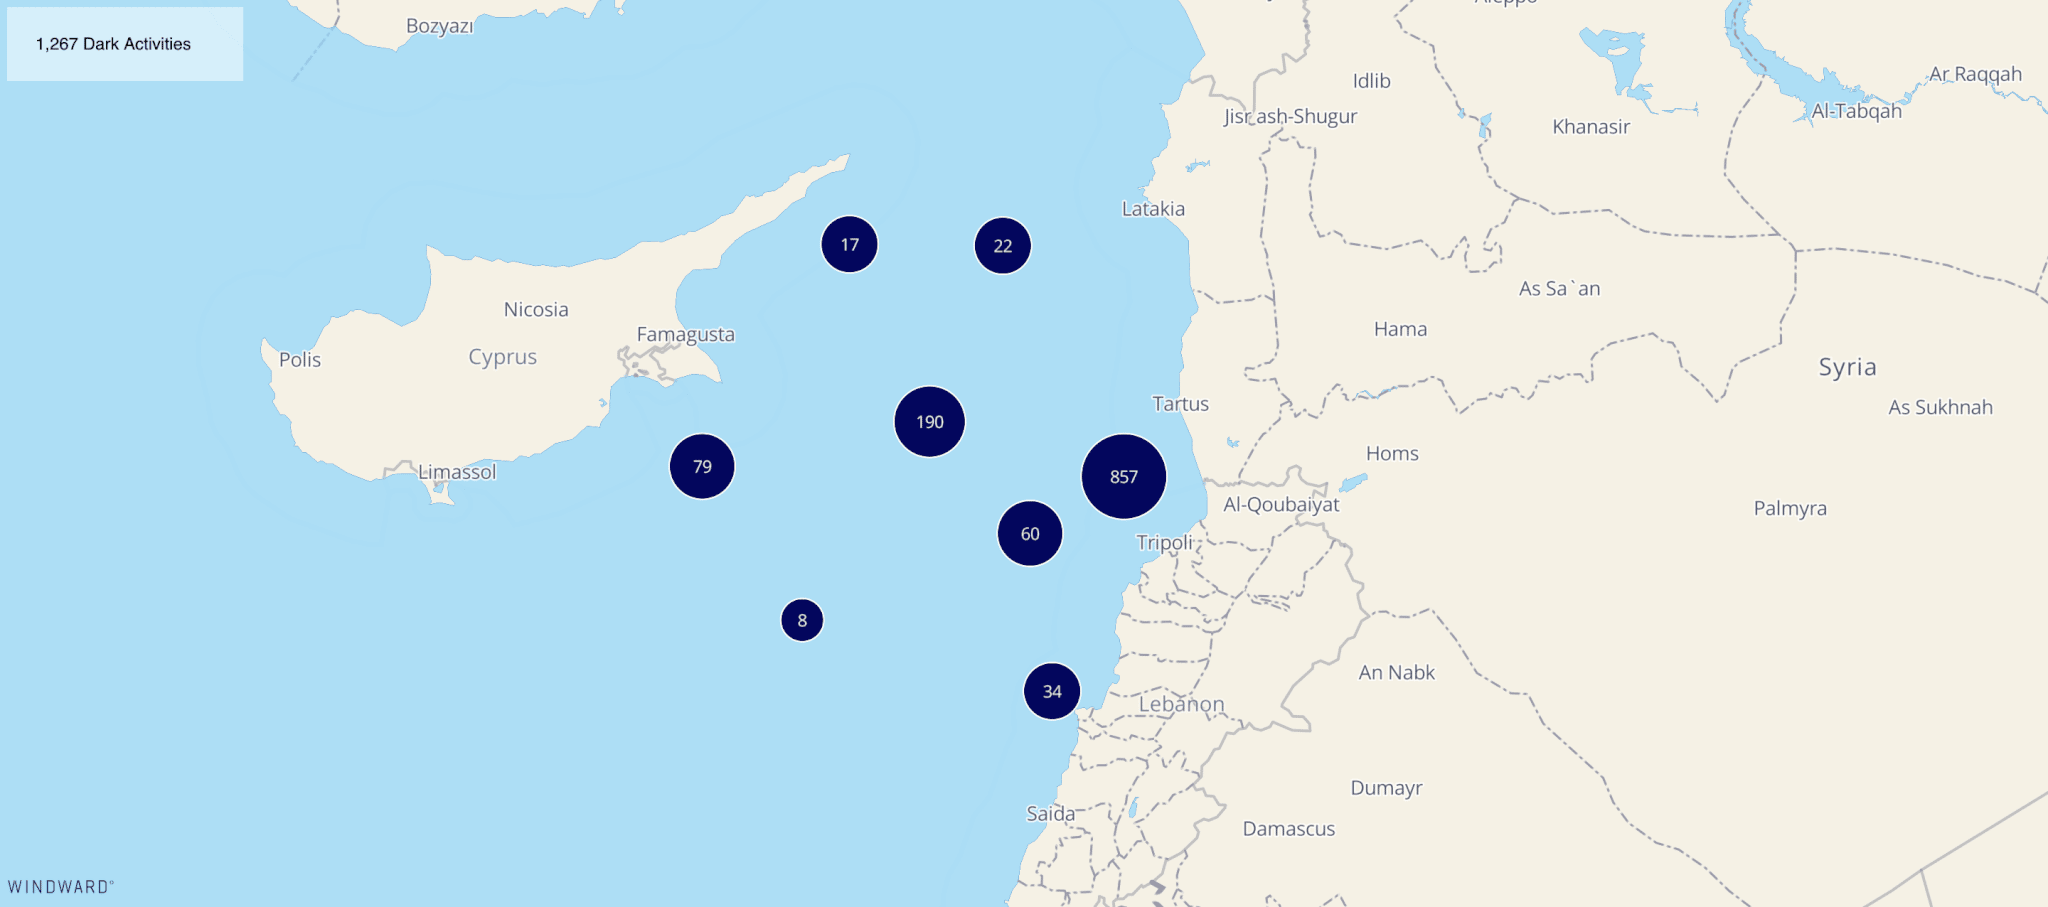 A map showing clustering of dark activities between Syria and Cyprus